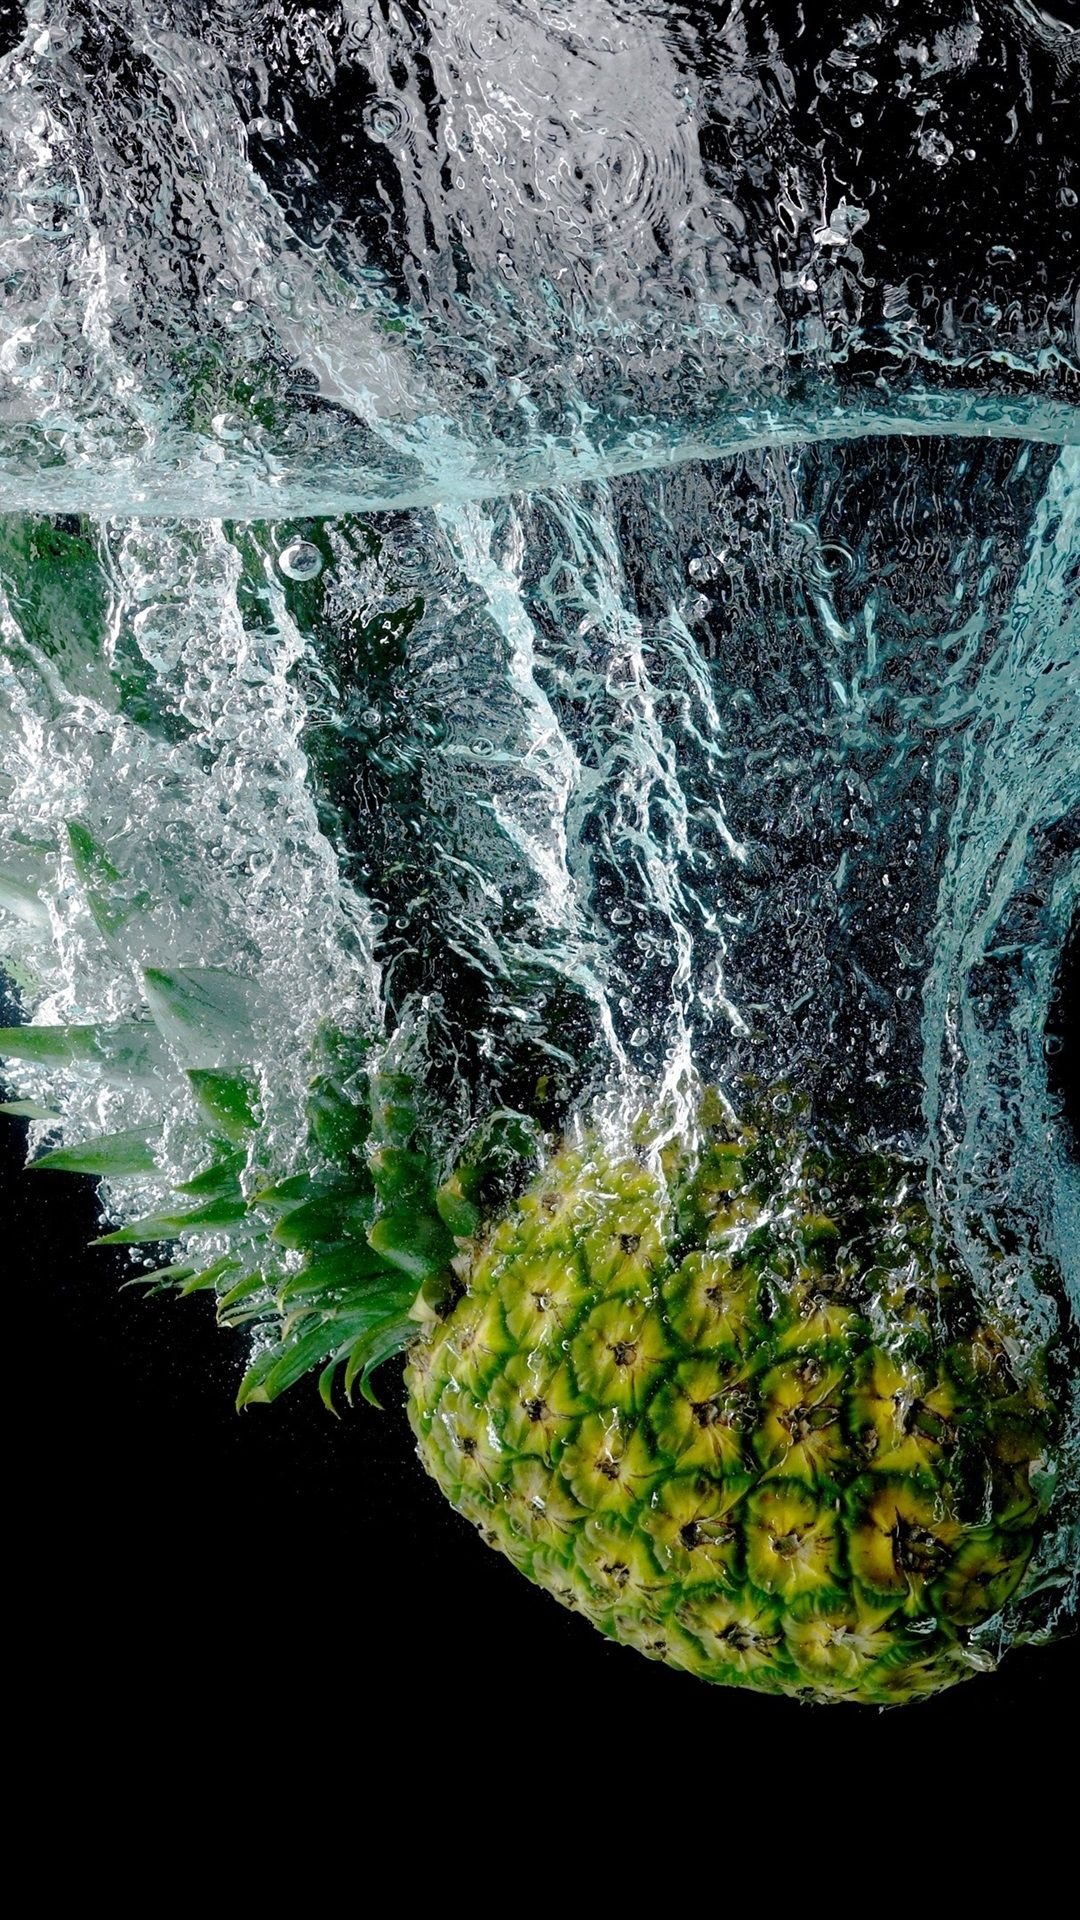 Pineapple Fall To The Water, Splash, Bubbles 1080x1920 IPhone 8 7